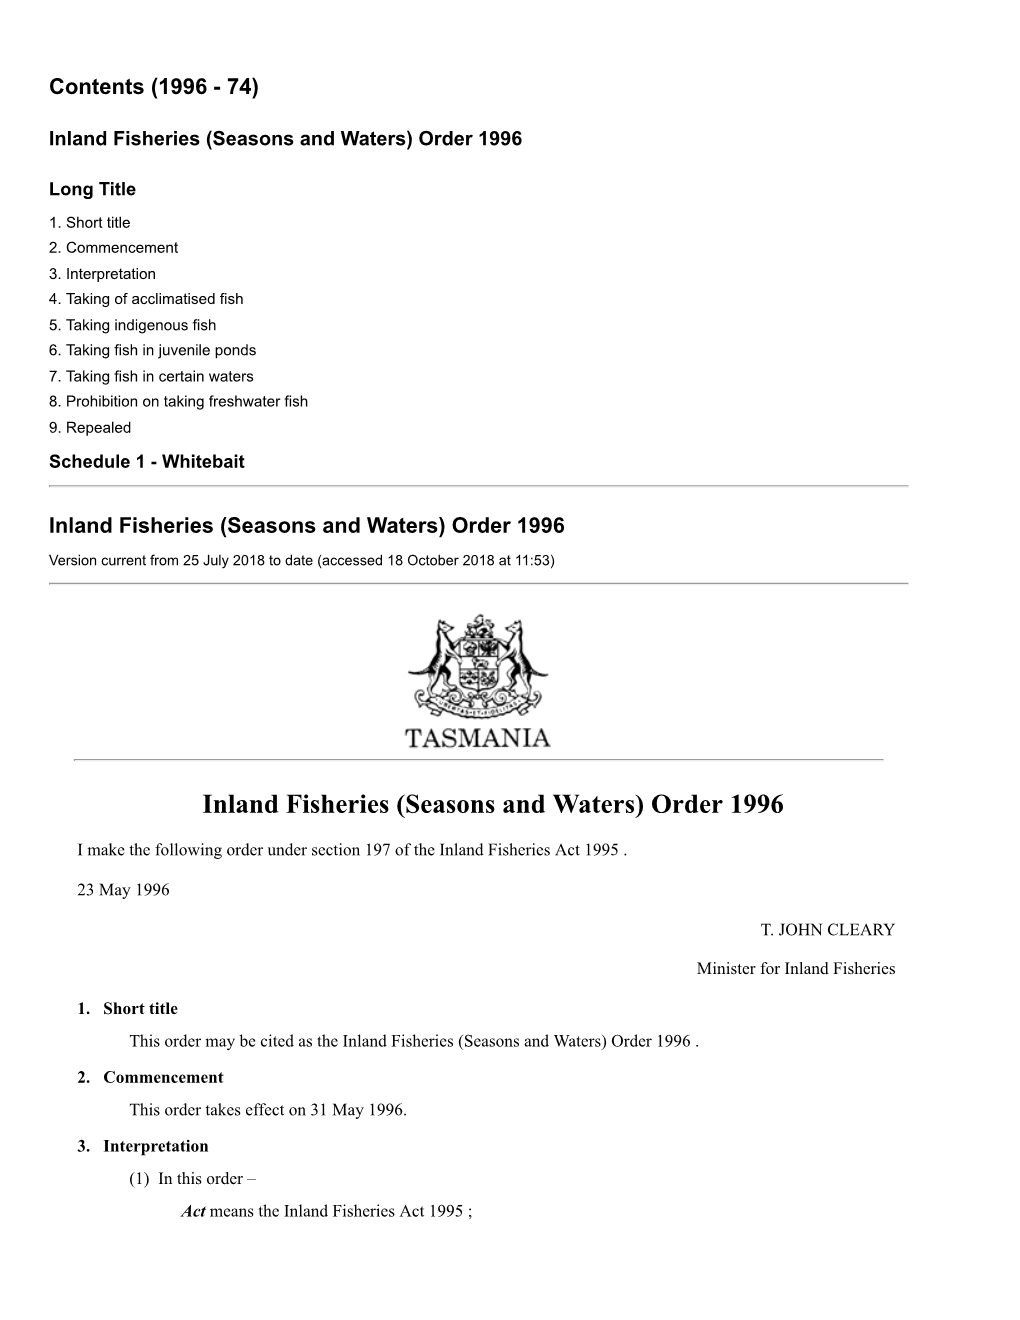 Inland Fisheries (Seasons and Waters) Order 1996